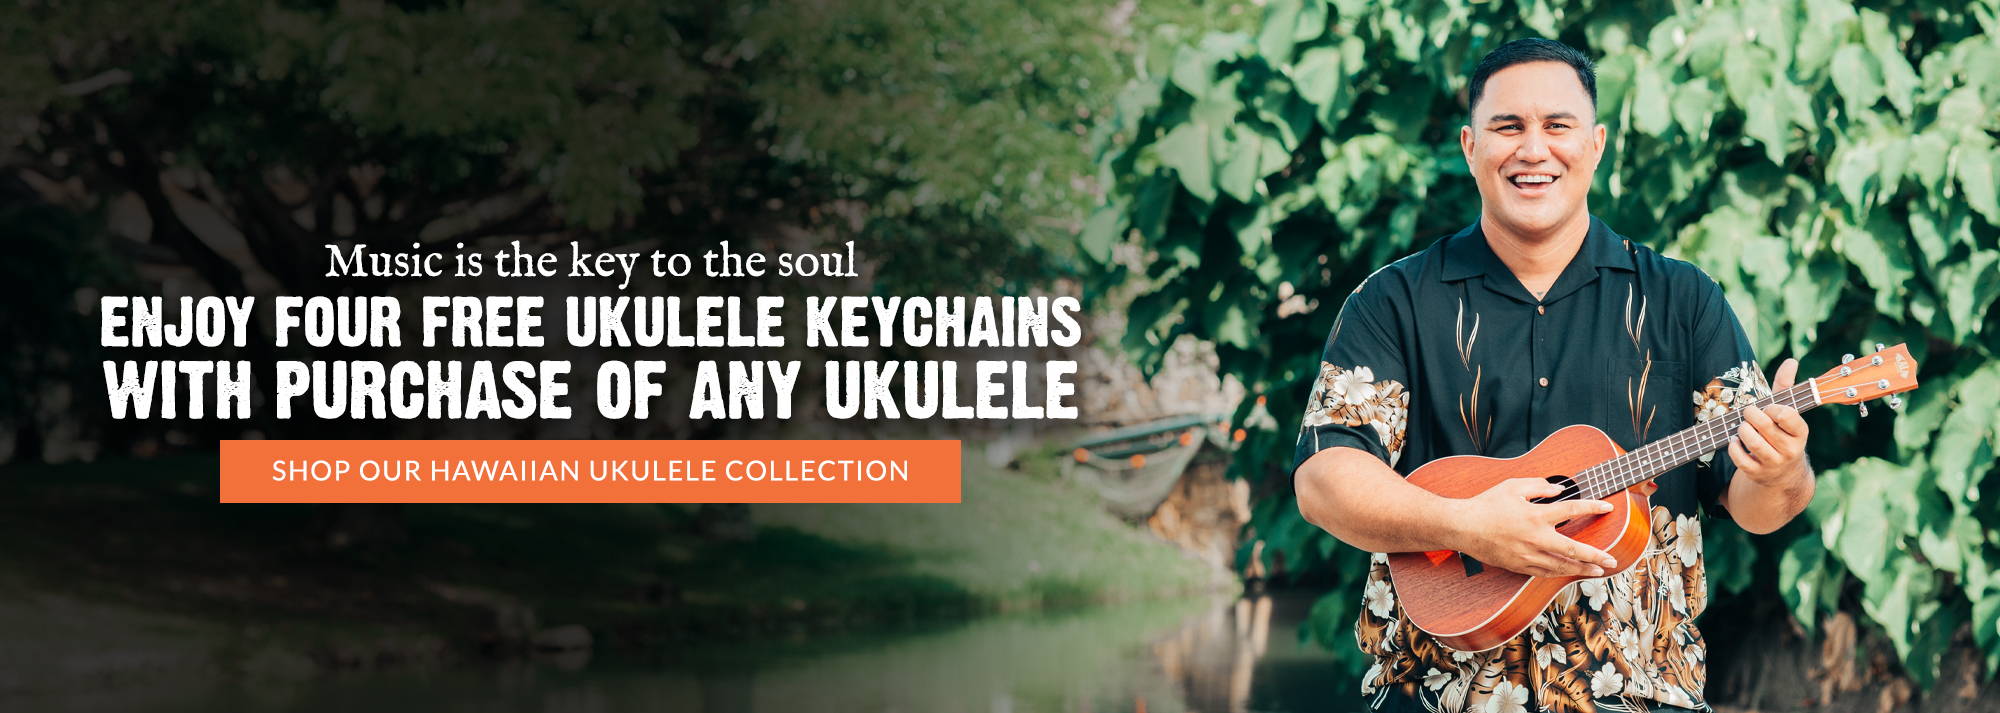 Enjoy a free gift with purchase of any ukulele. Music is key, so carry the key with you! Free ukulele keychain with purchase of any ukulele